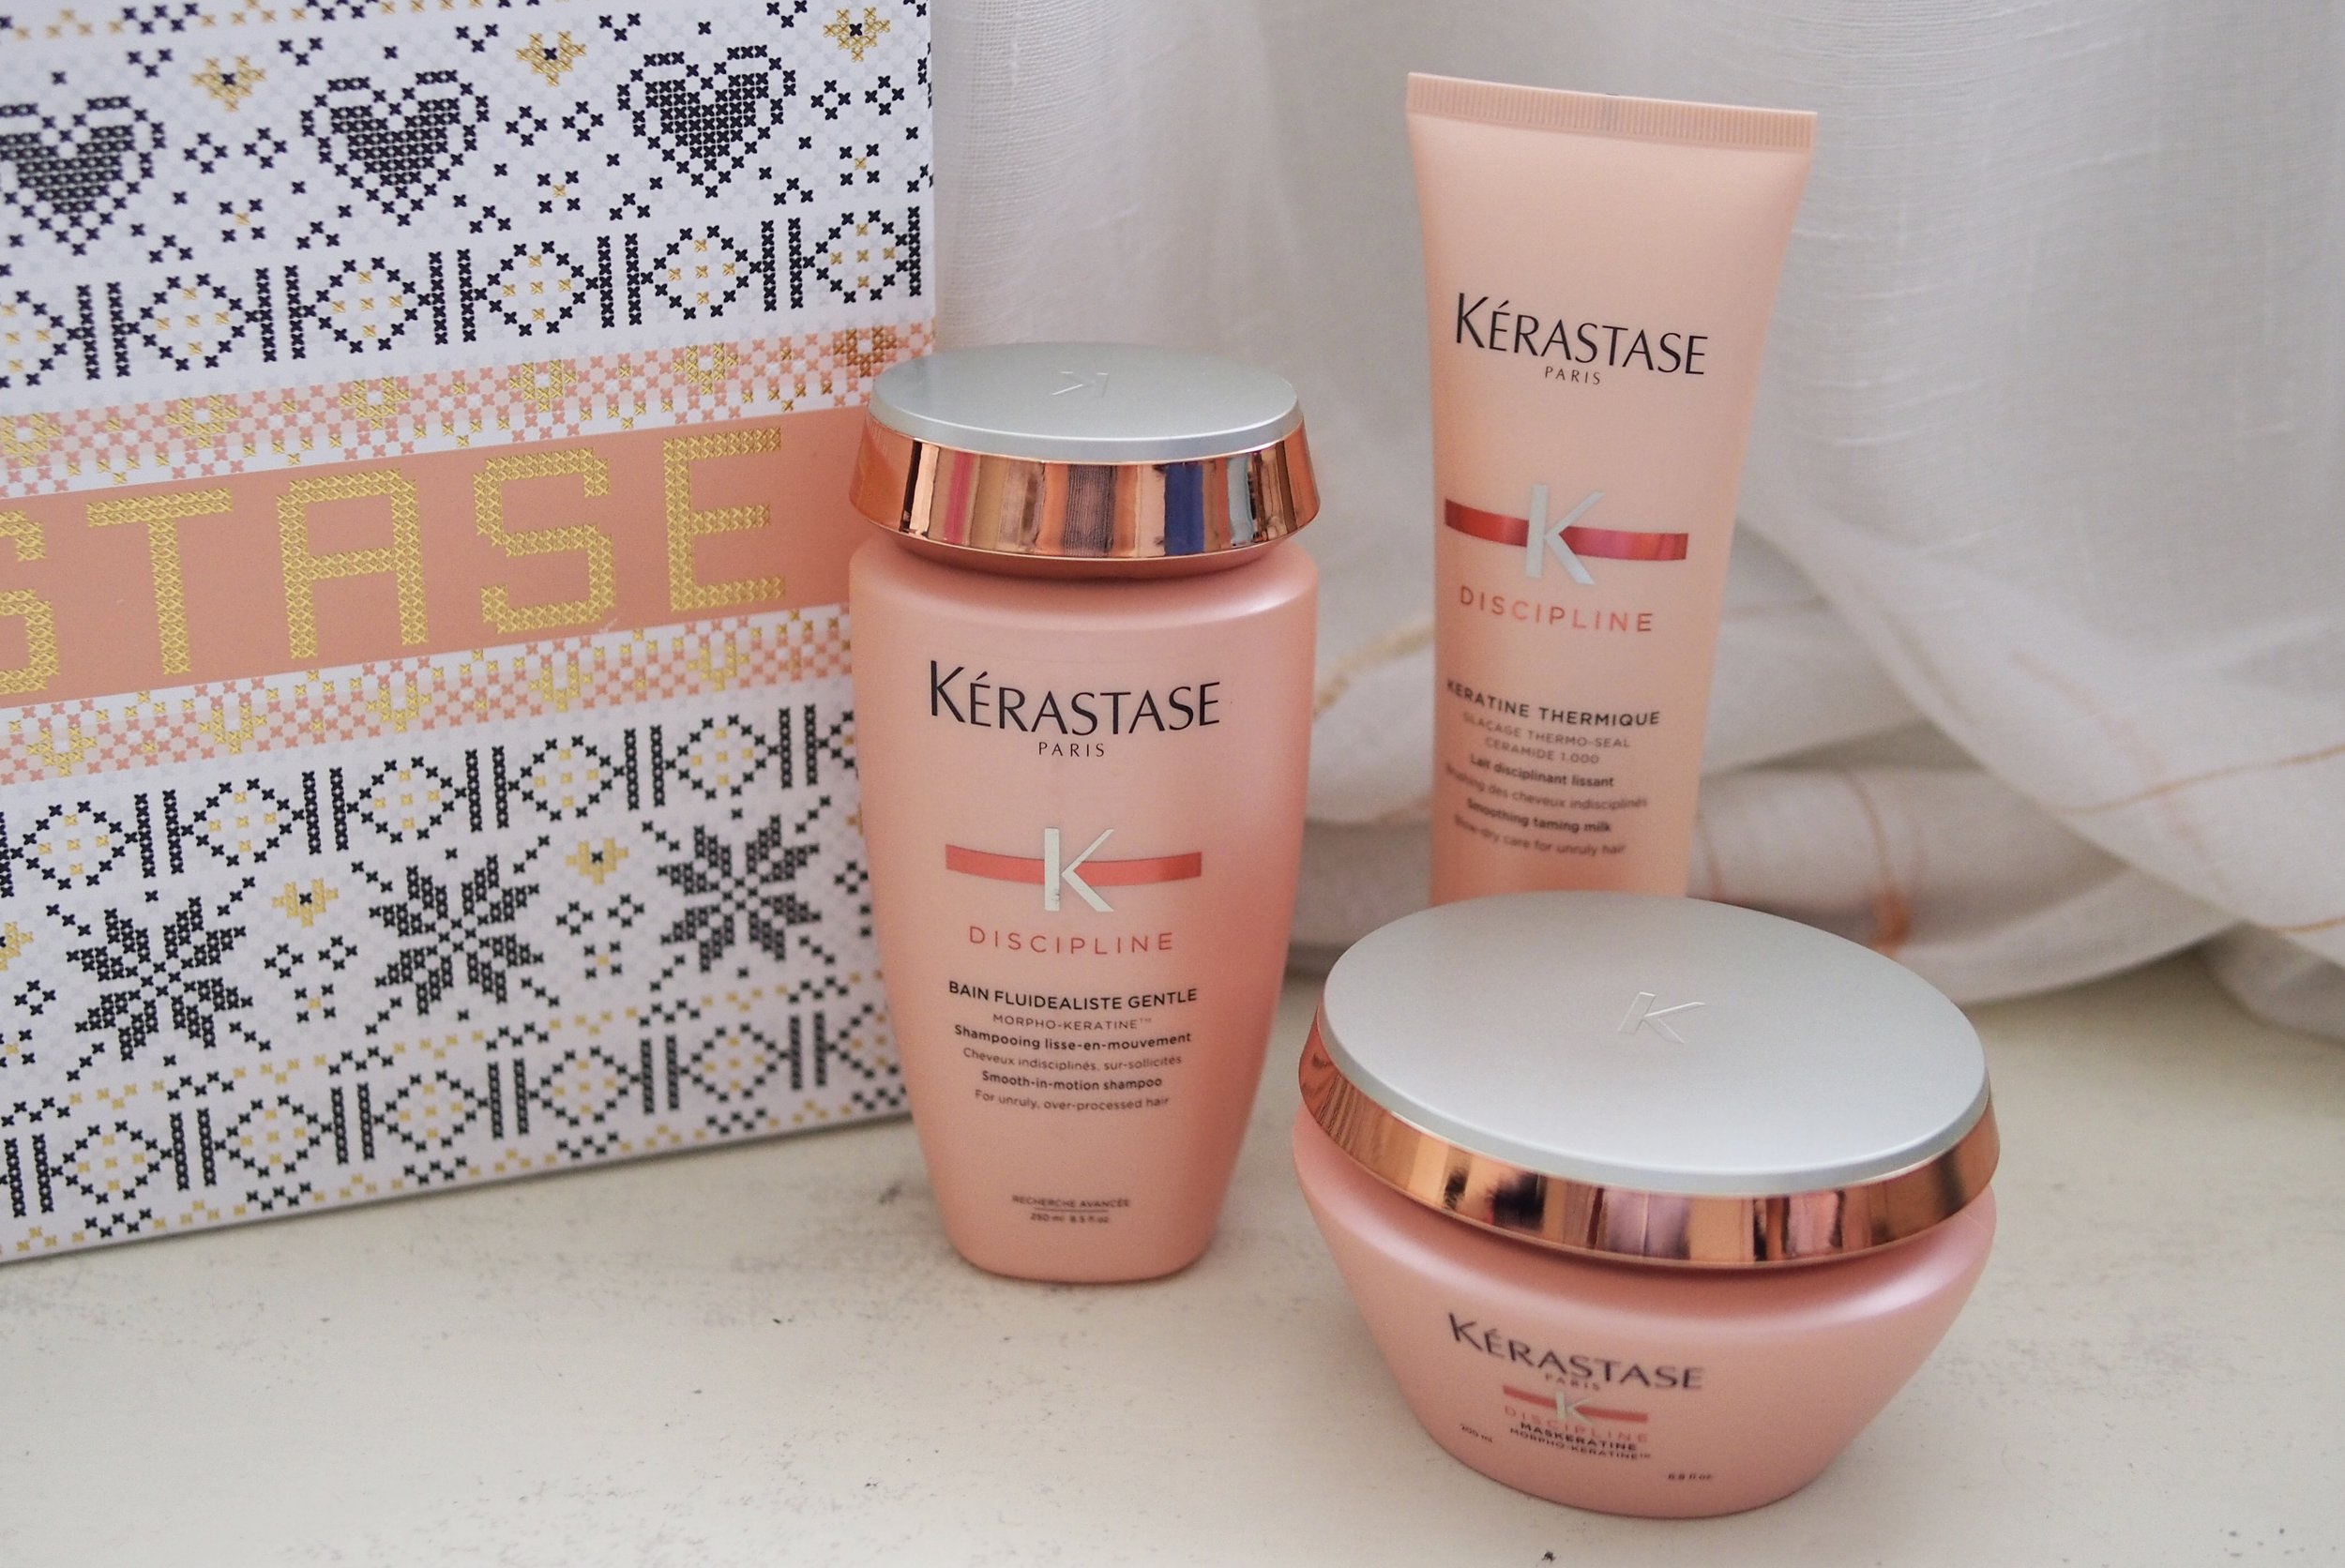 Tale Ubevæbnet tjære Trying out the Kerastase Discipline Fluidealiste Anti-Frizz Masque Hair  Ritual on my grey, frizzy hair: Did it work? — Project Vanity